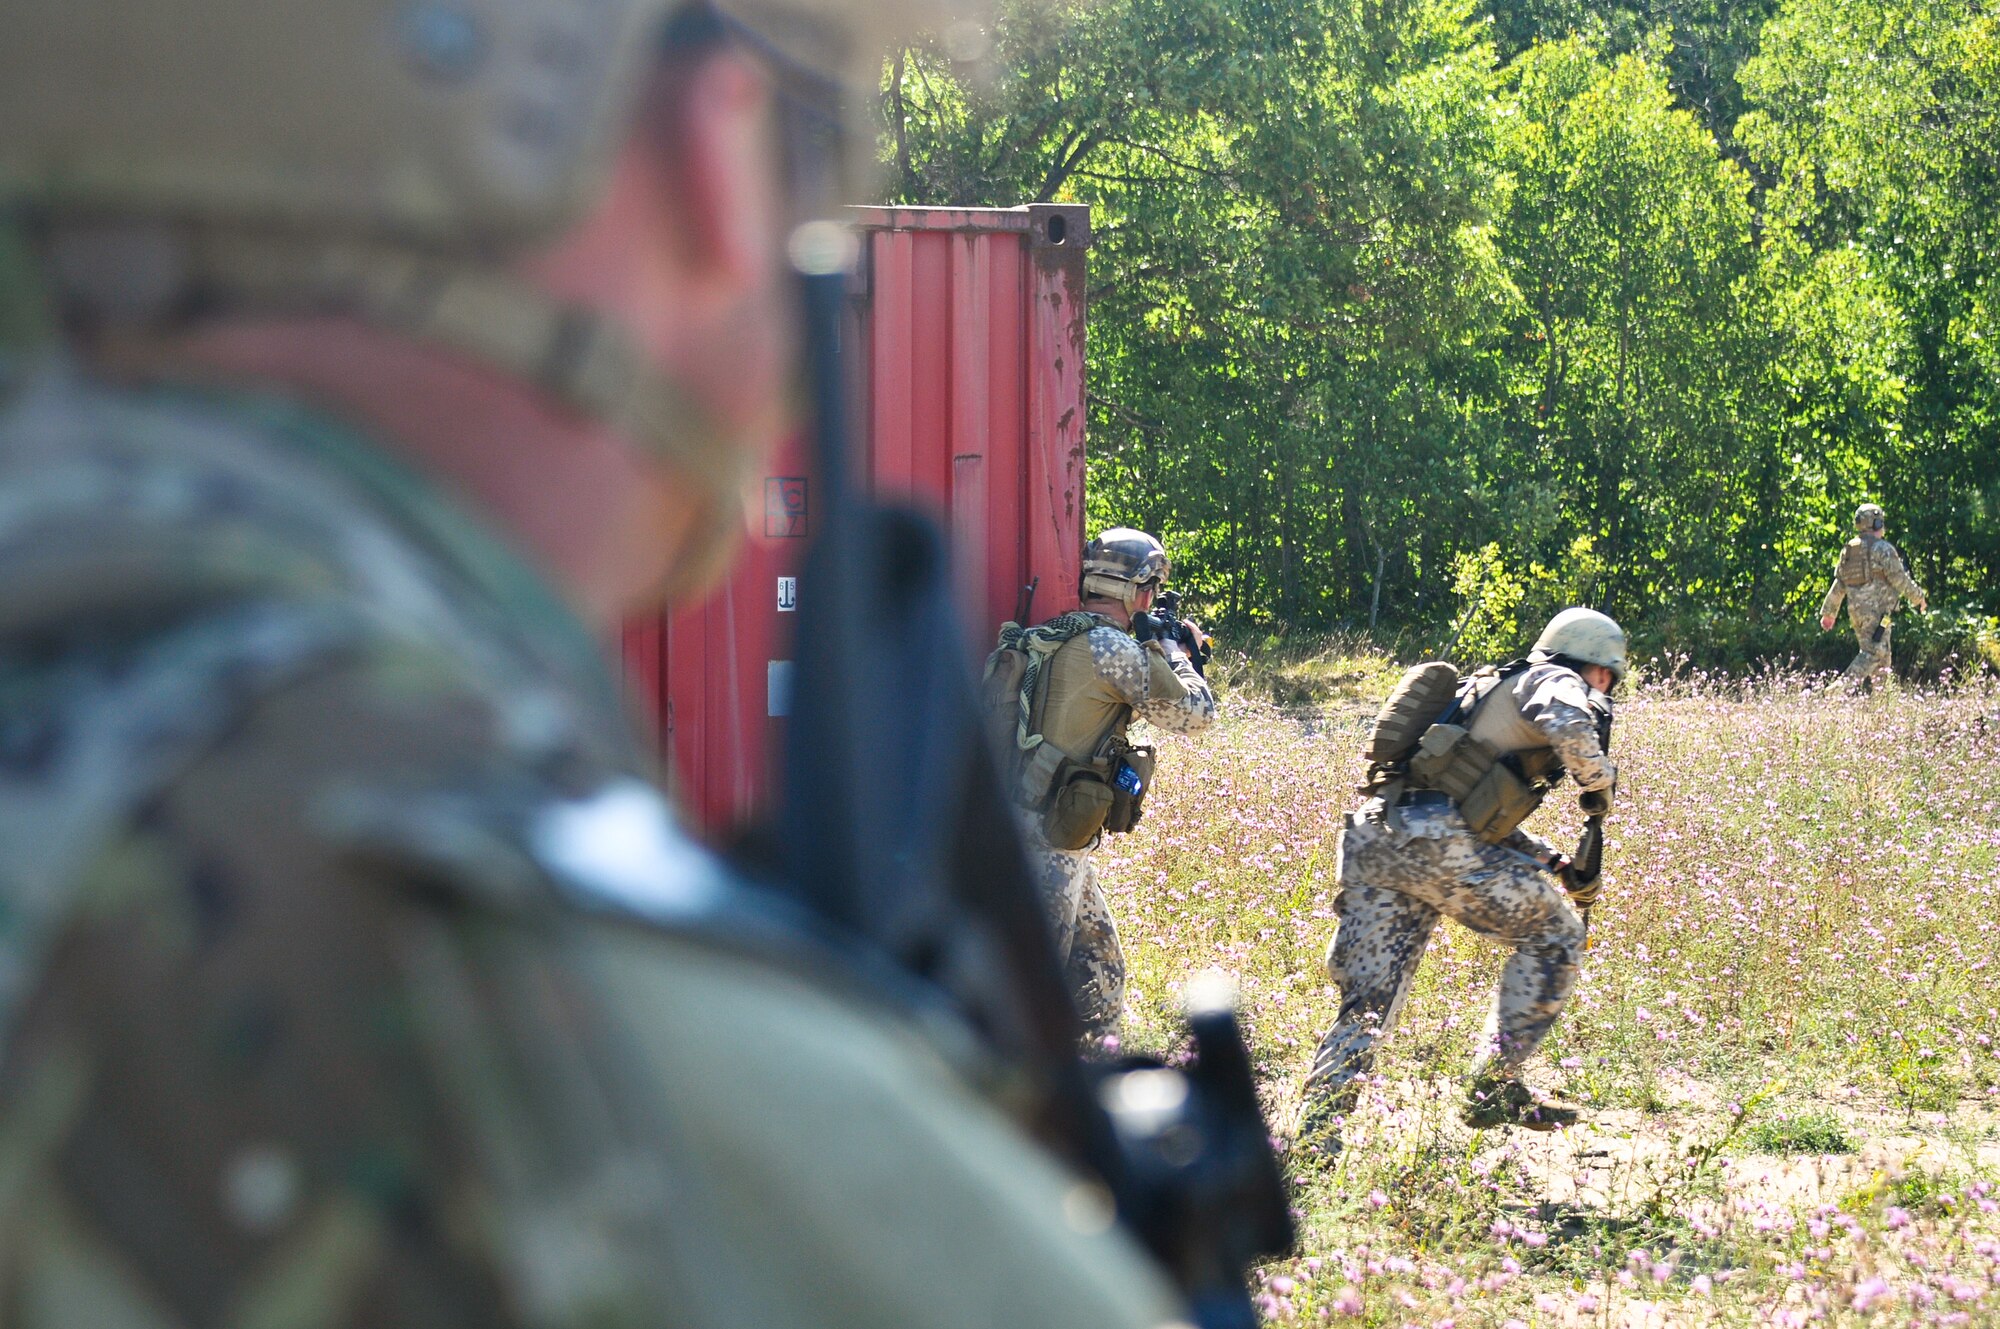 Tactical air control party specialists with the Latvian National Armed Forces advance on enemy forces while a TACP with the 169th Air Support Operations Squadron provides cover fire after an ambush during a reconnaissance mission at Operation Northern Strike in Grayling Air Gunnery Range, Grayling, Mich., Aug. 14, 2014. Northern Strike was a 3-week-long exercise led by the National Guard that demonstrated the combined power of joint and multinational air and ground forces. TACPs with the Air National Guard’s 169th ASOS from Peoria, Ill., and more than 5,000 other armed forces members from 12 states and two coalition nations participated in the combat training. (U.S. Air National Guard photo by Staff Sgt. Lealan Buehrer/Released)